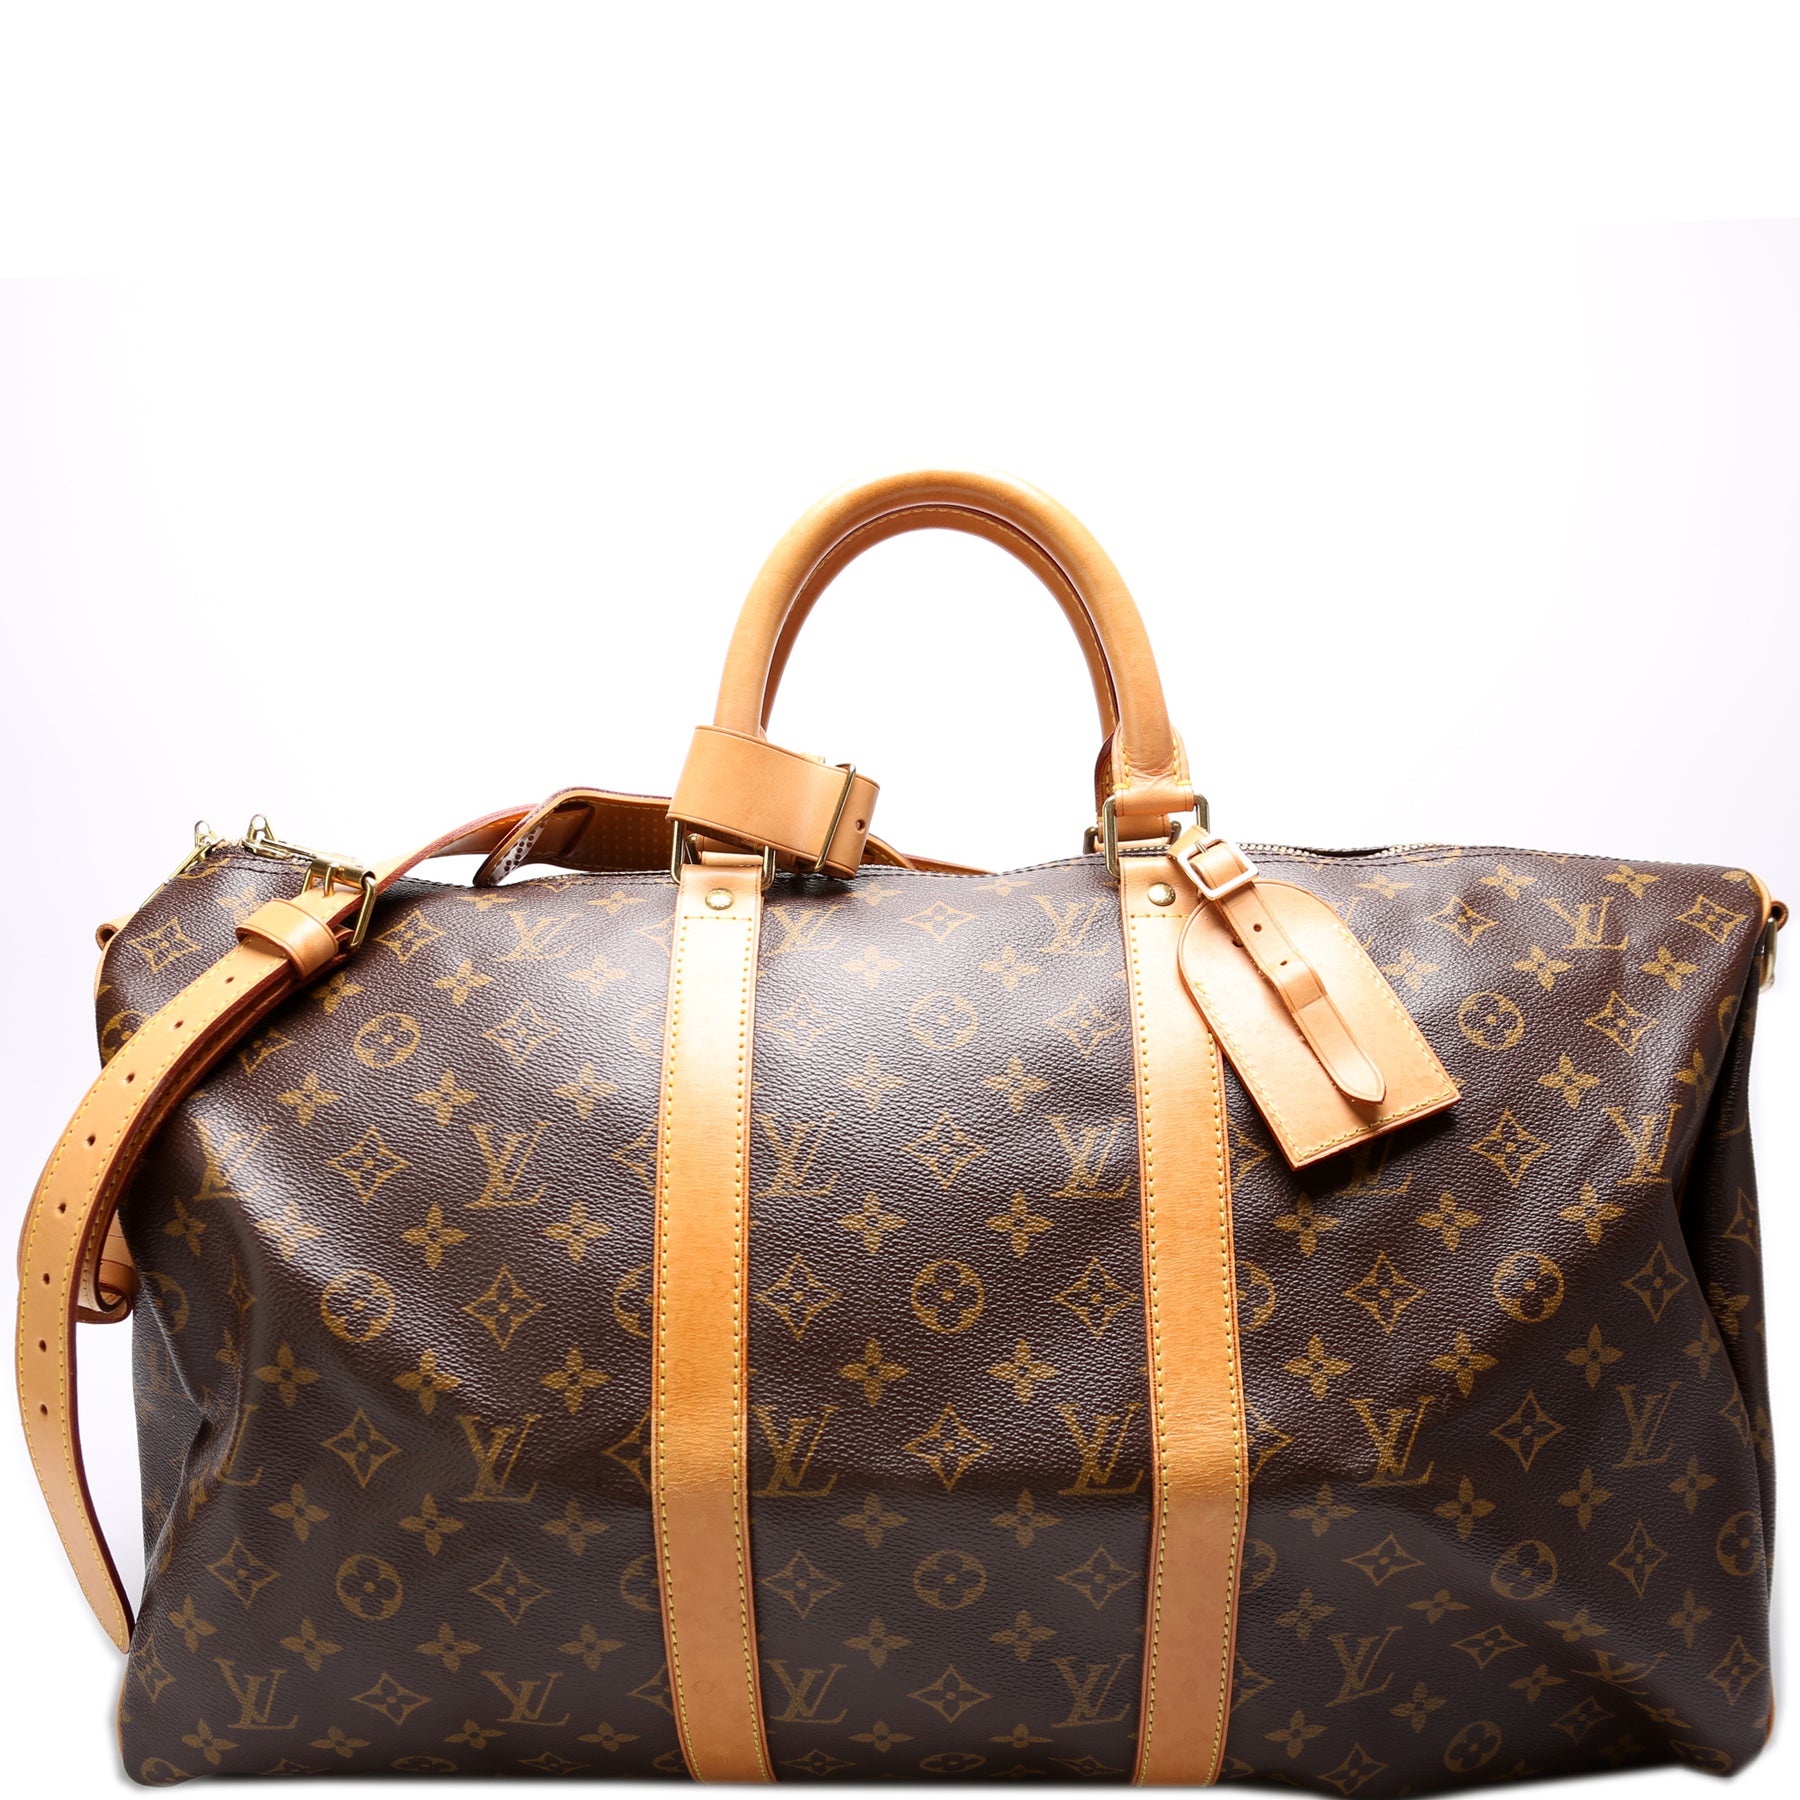 LOUIS VUITTON KEEPALL BANDOULIERE 50 - WEAR AND TEAR AFTER MORE